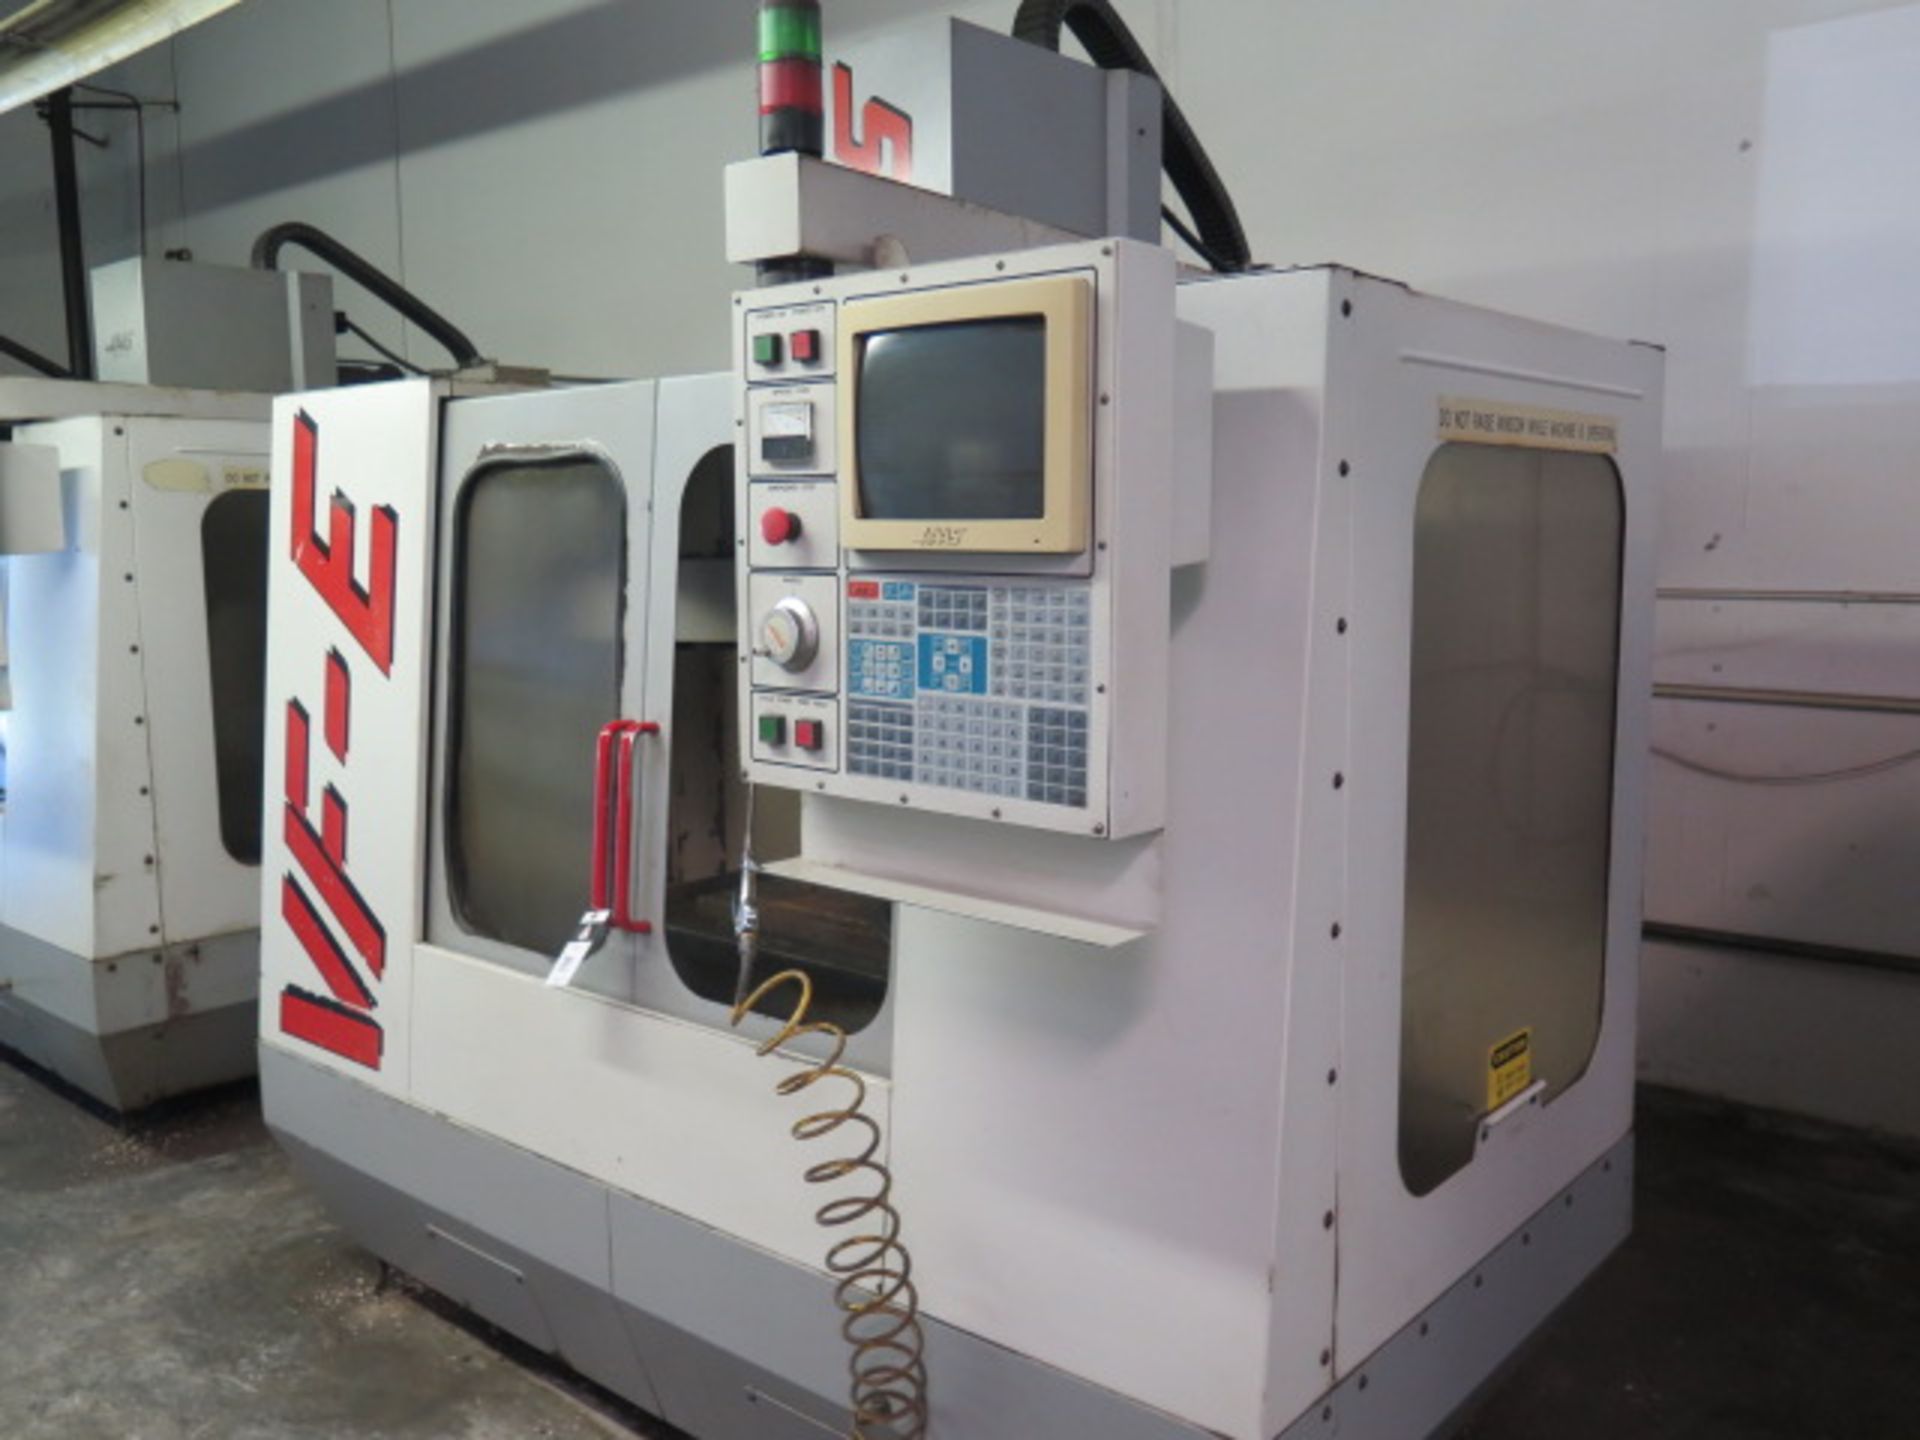 1996 Haas VF-E CNC VMC s/n 7725 w/ Haas Controls, 20-Station ATC, CAT-40 Taper, SOLD AS IS - Image 2 of 18